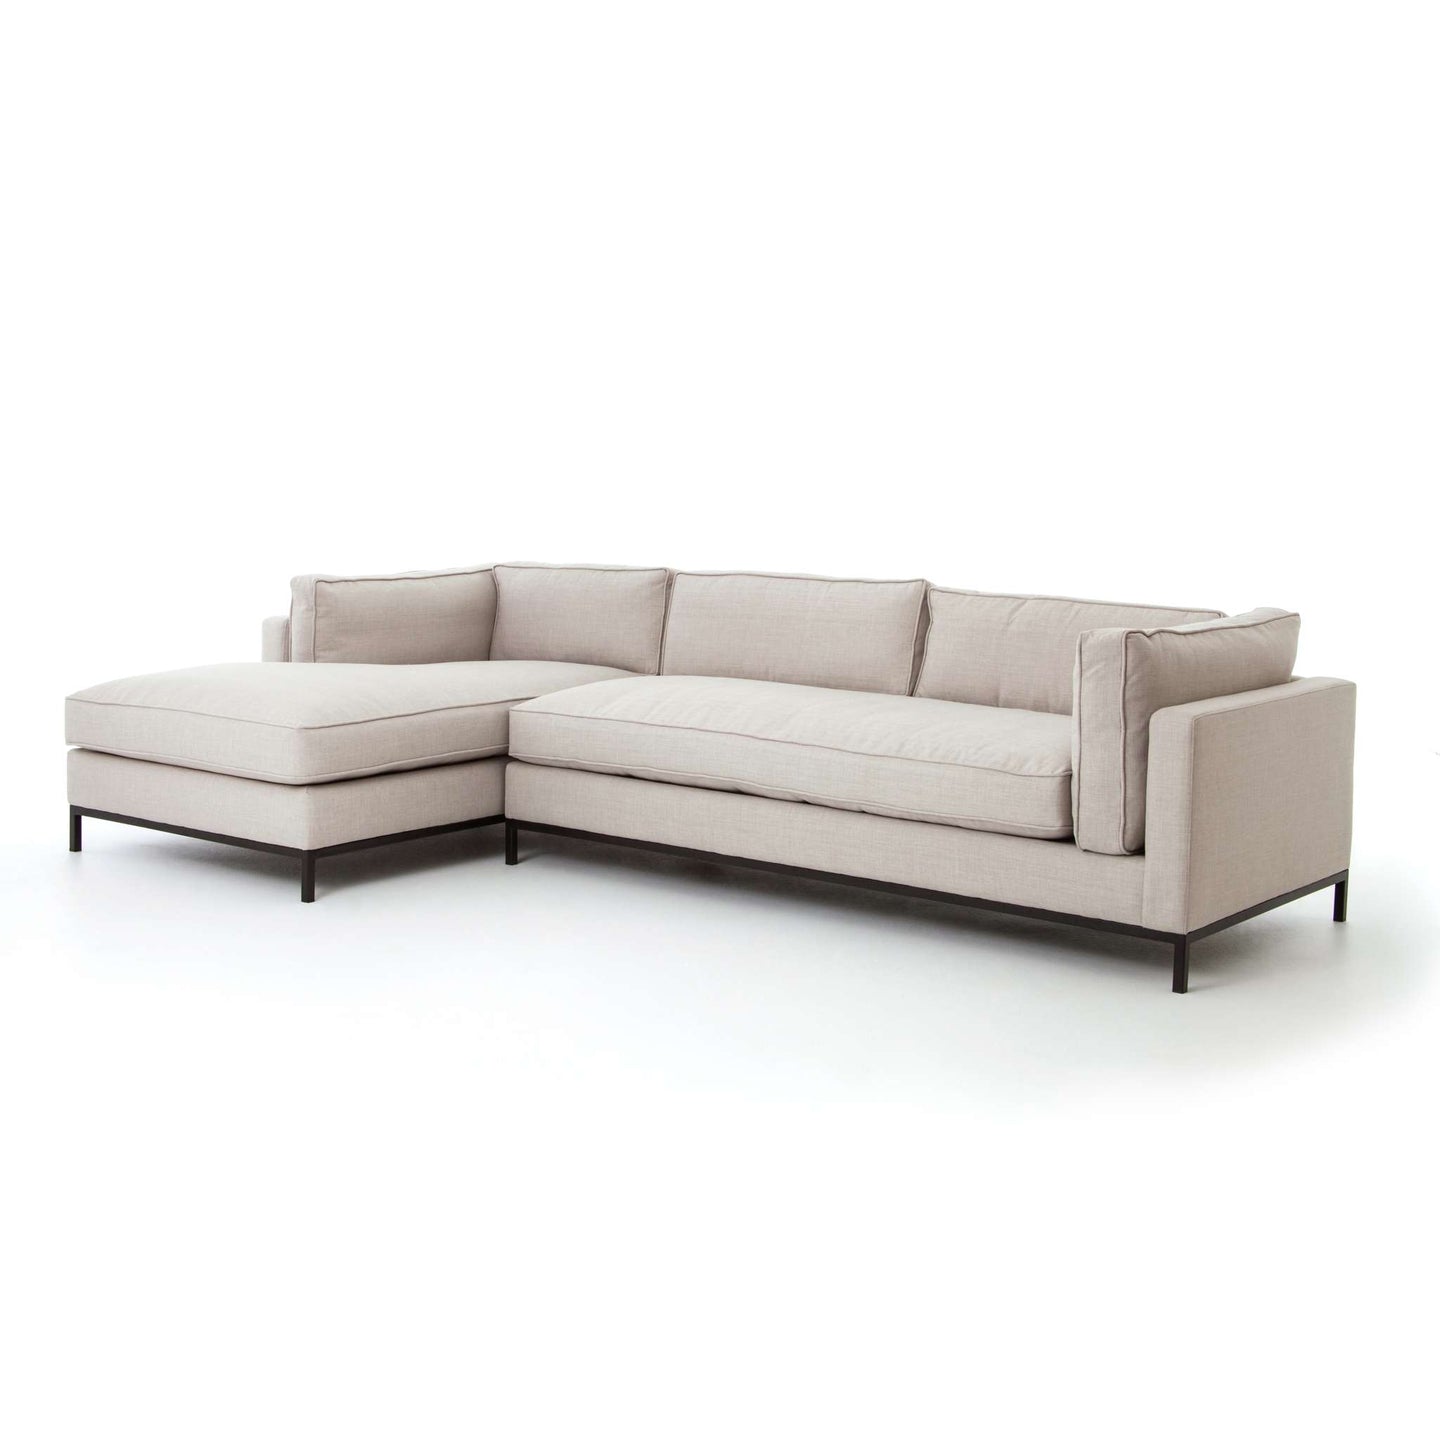 Grammercy 2 Pc Sectional Laf Chaise